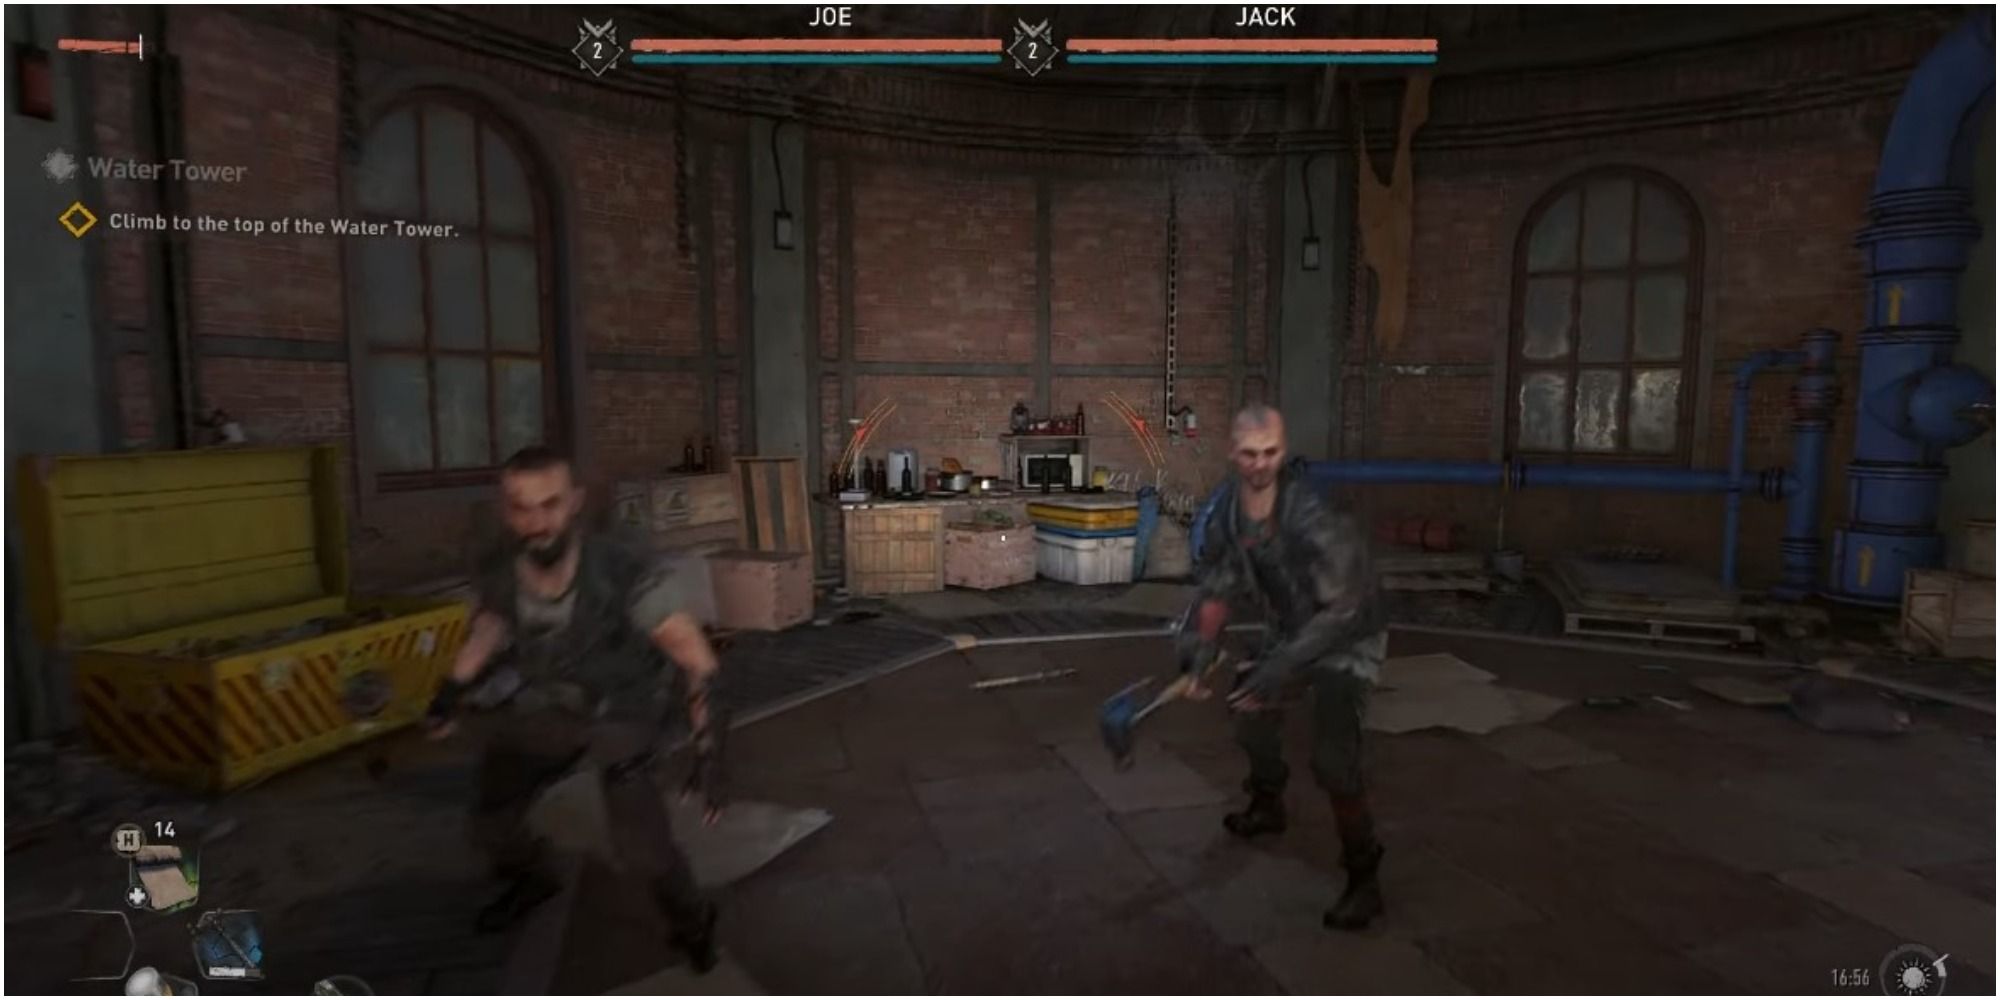 Dying Light 2 Fighting Jack And Joe After Refusing To Help Them